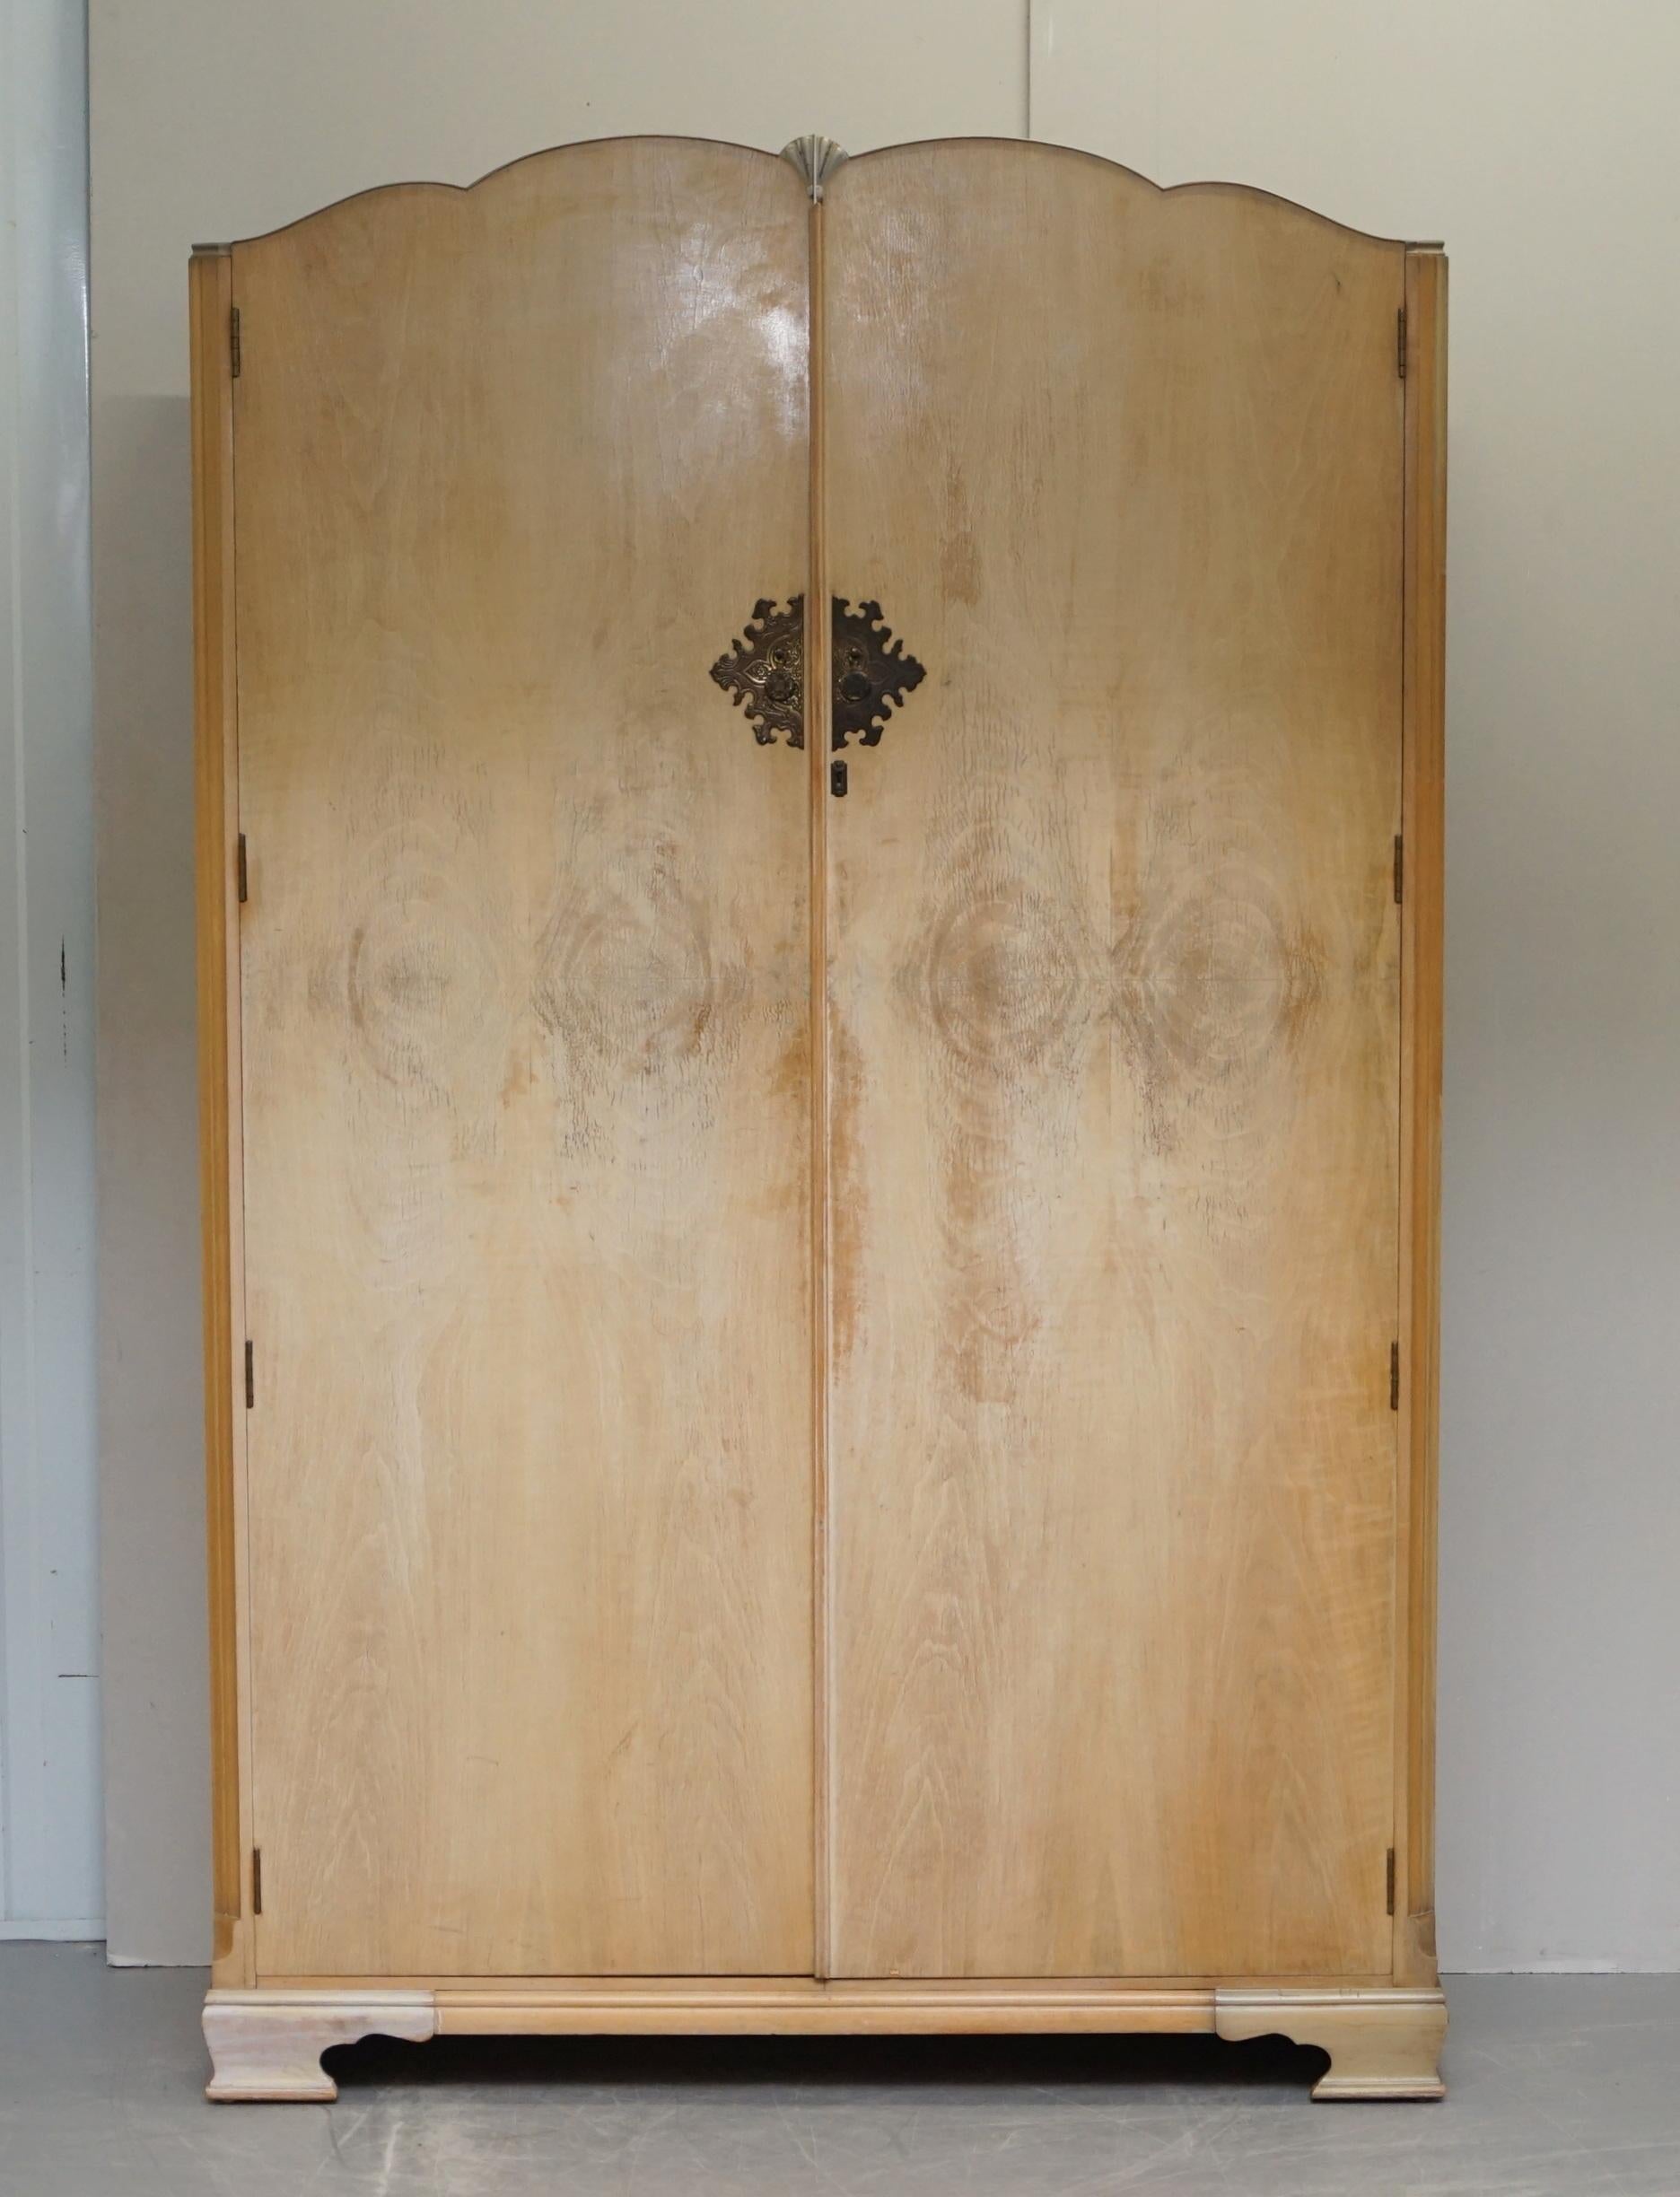 We are delighted to offer for sale this lovely Art Deco style Burr light Walnut double wardrobe which is part of a suite 

This piece is very well made indeed, the timber patina is sublime, it looks very French Deco! Inside you find two large